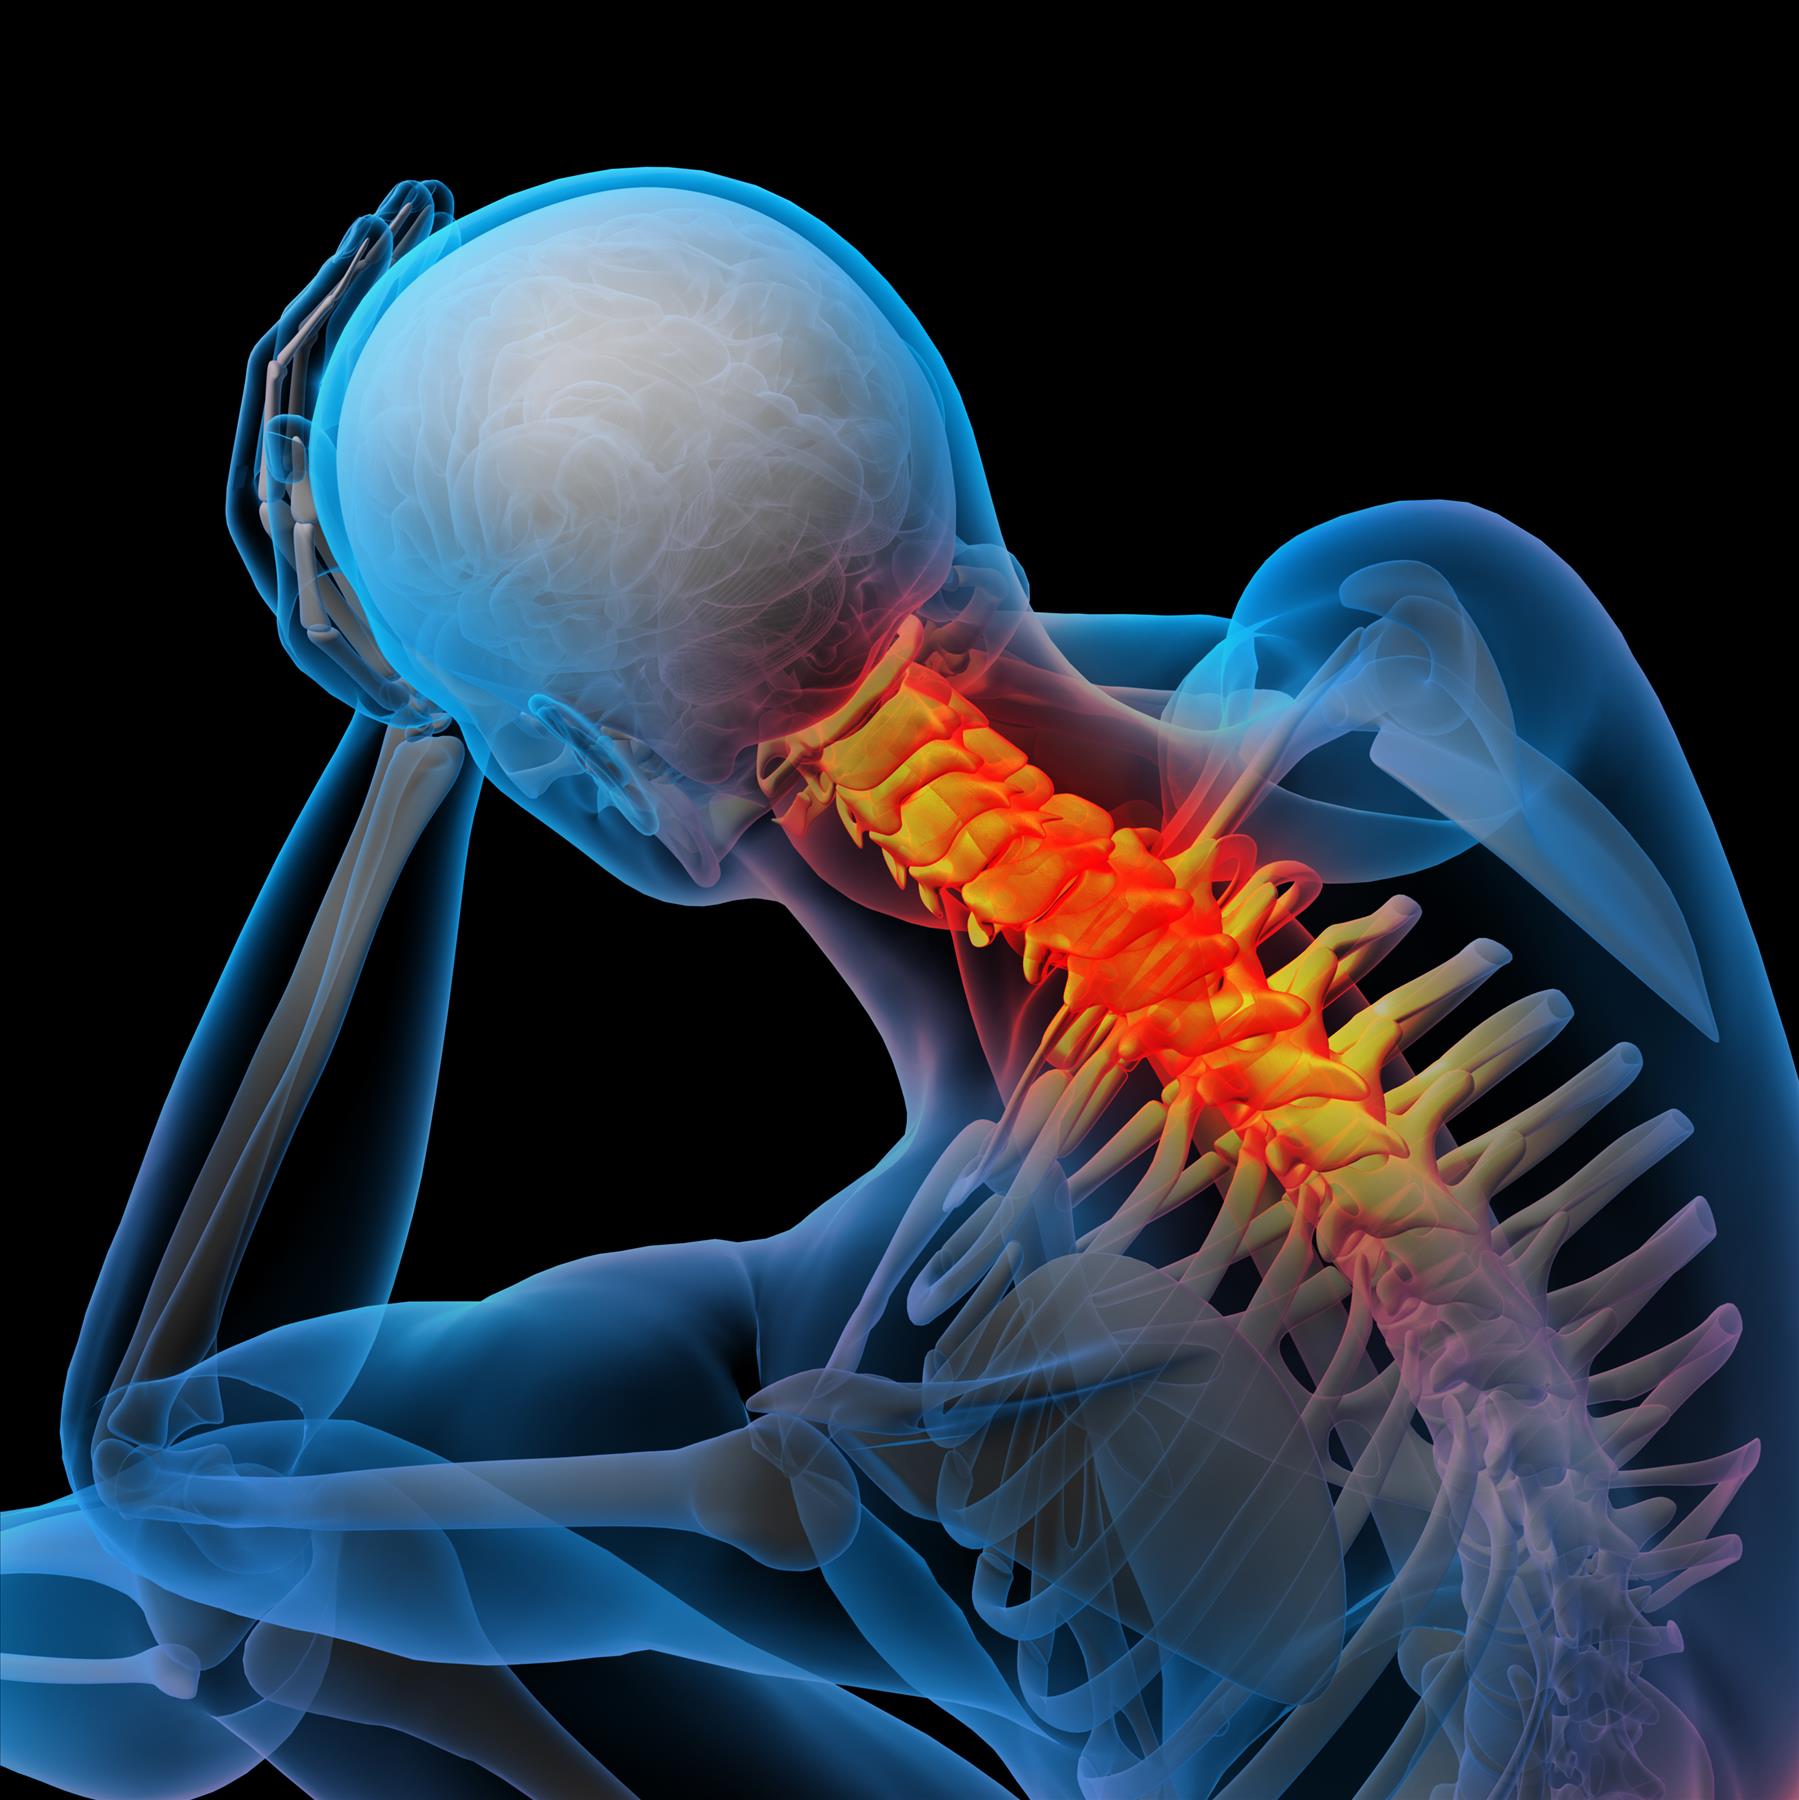 Hiring a Neck Injury Attorney after a Serious Whiplash Injury